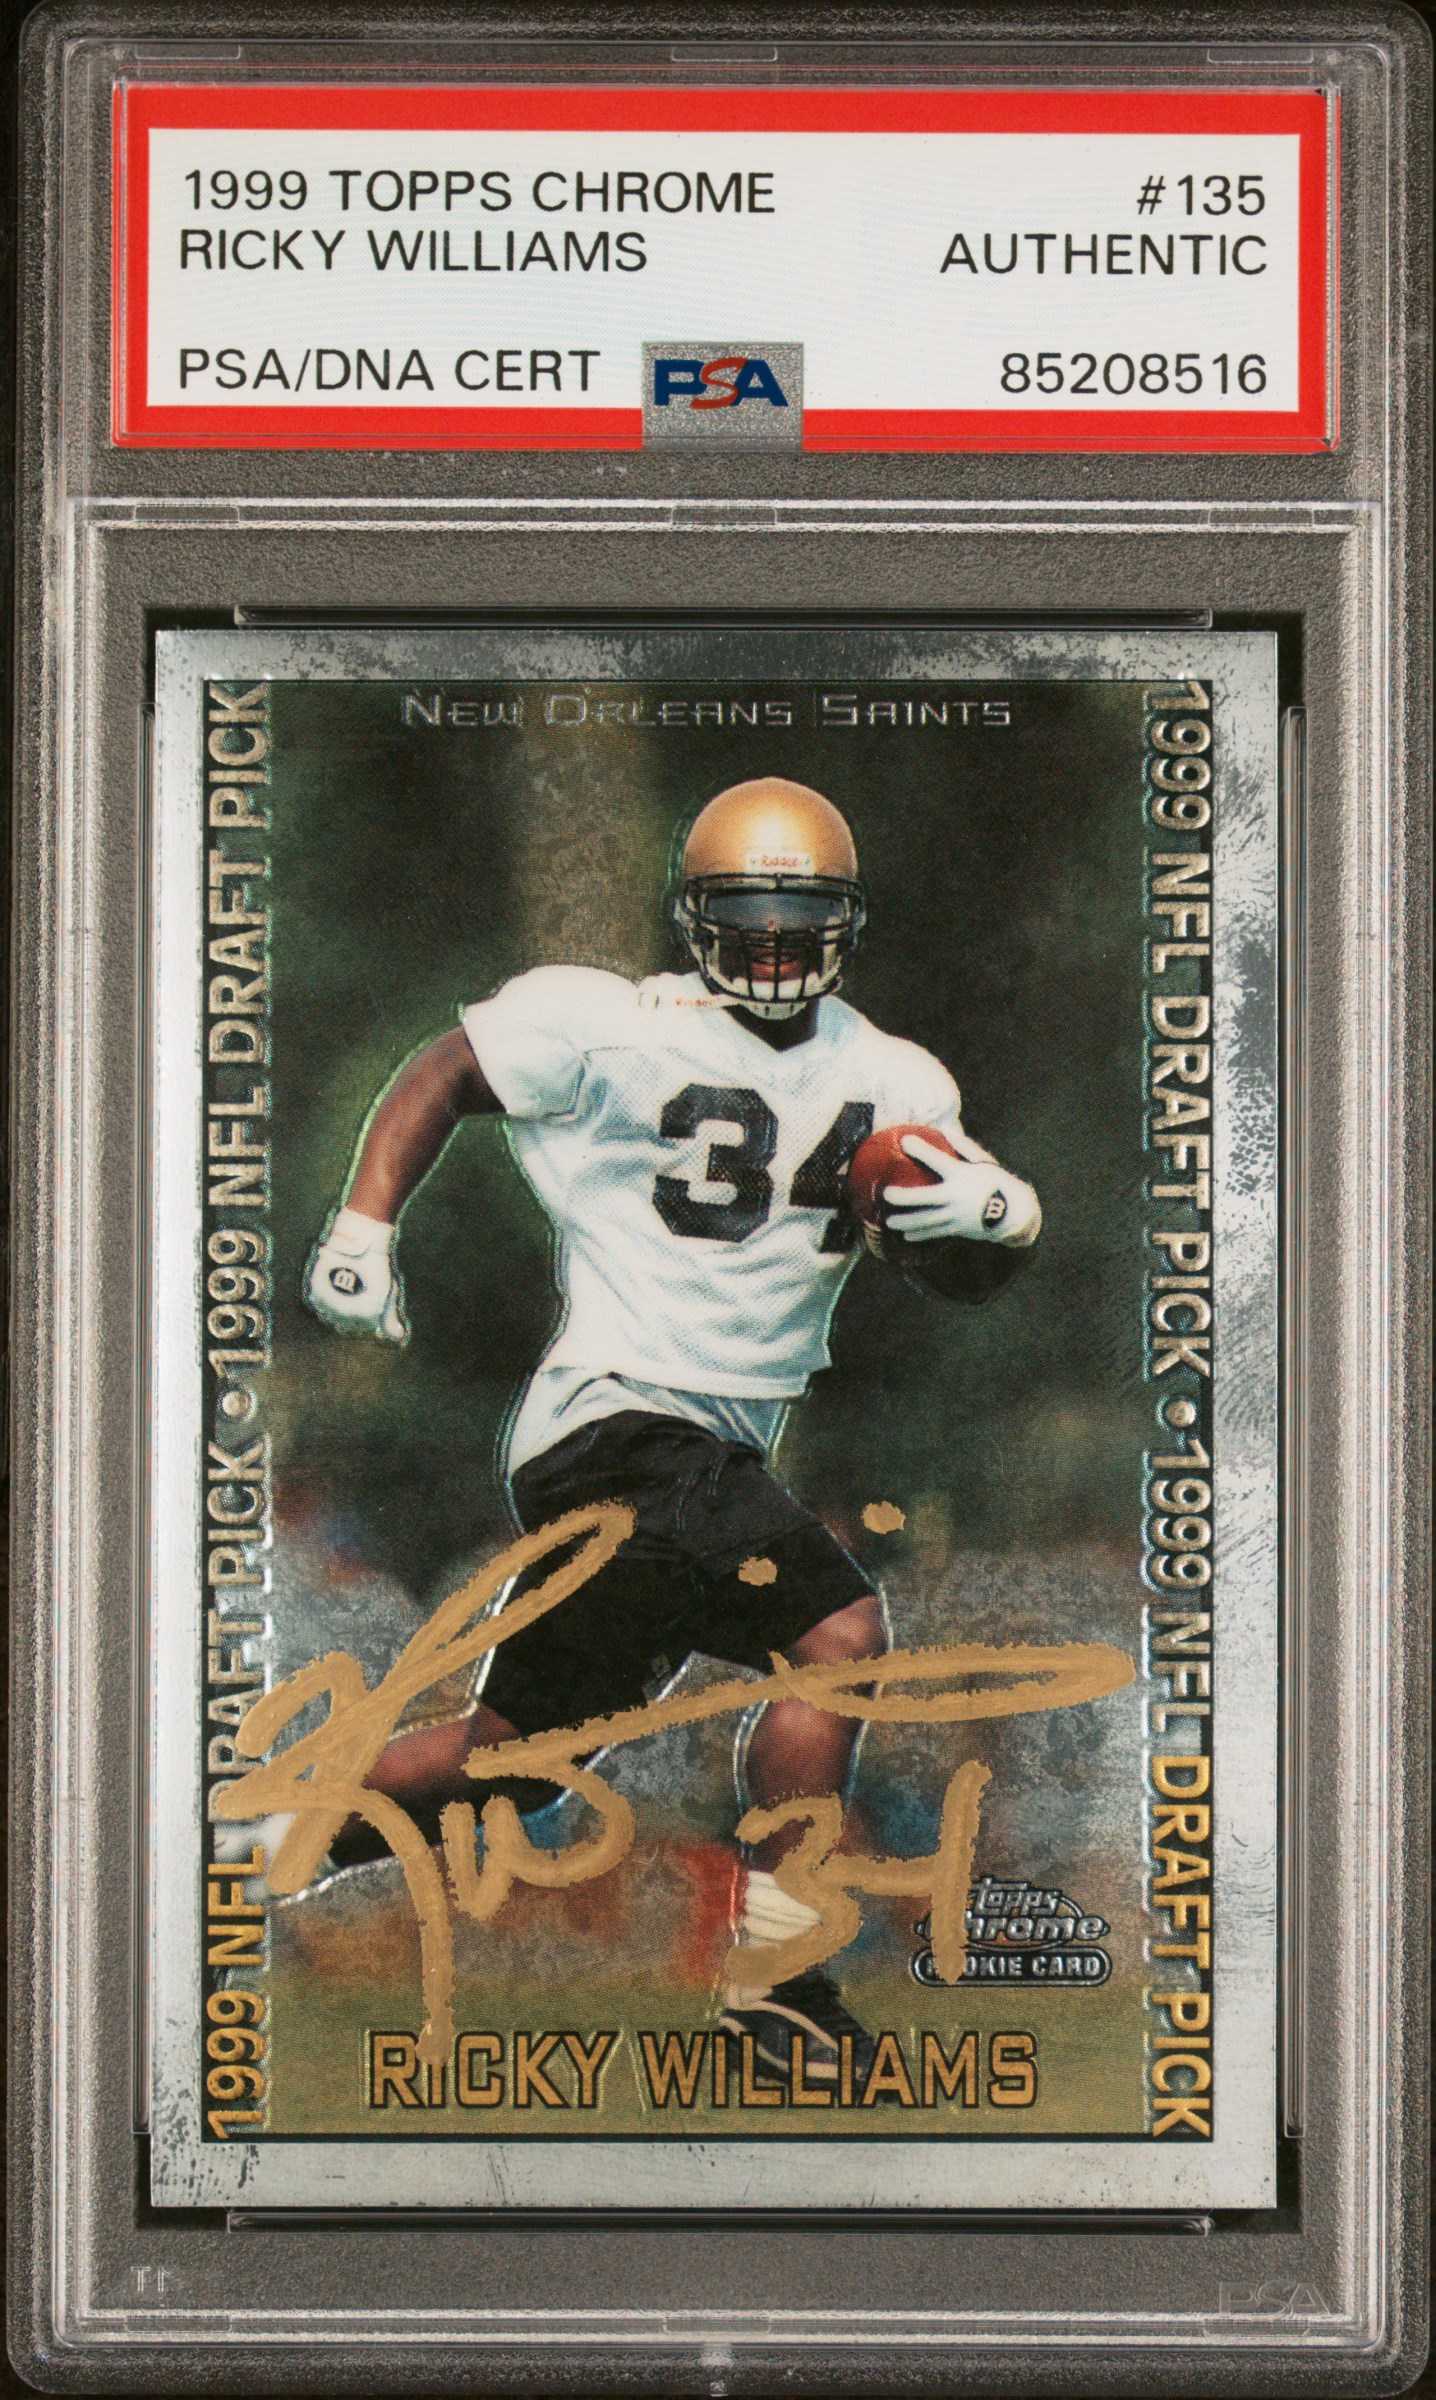 Ricky Williams 1999 Topps Chrome Signed Rookie Card #135 Auto PSA 85208516